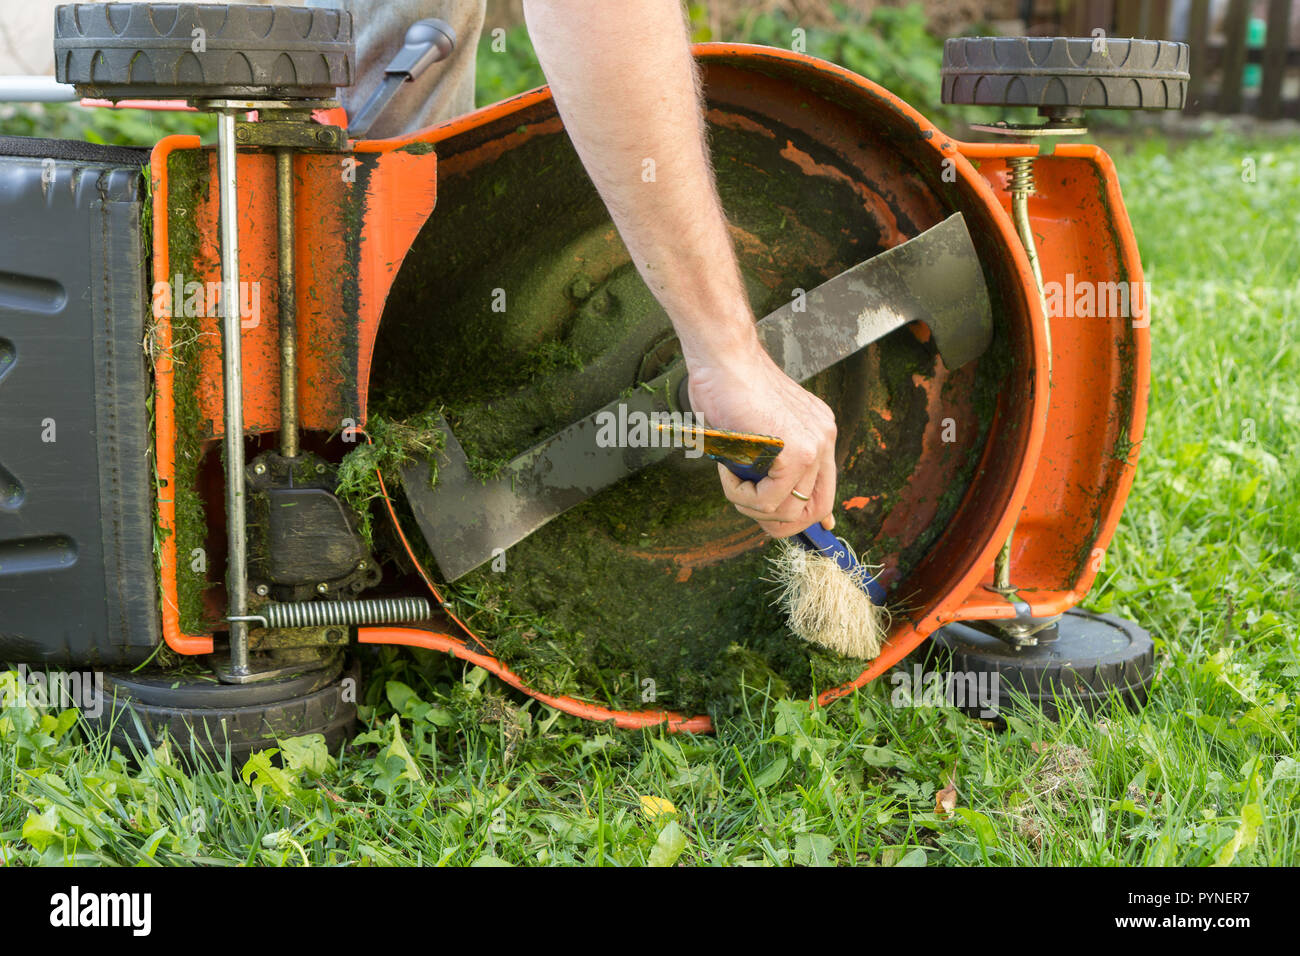 Man's hand with brush cleaning lawn mower Stock Photo